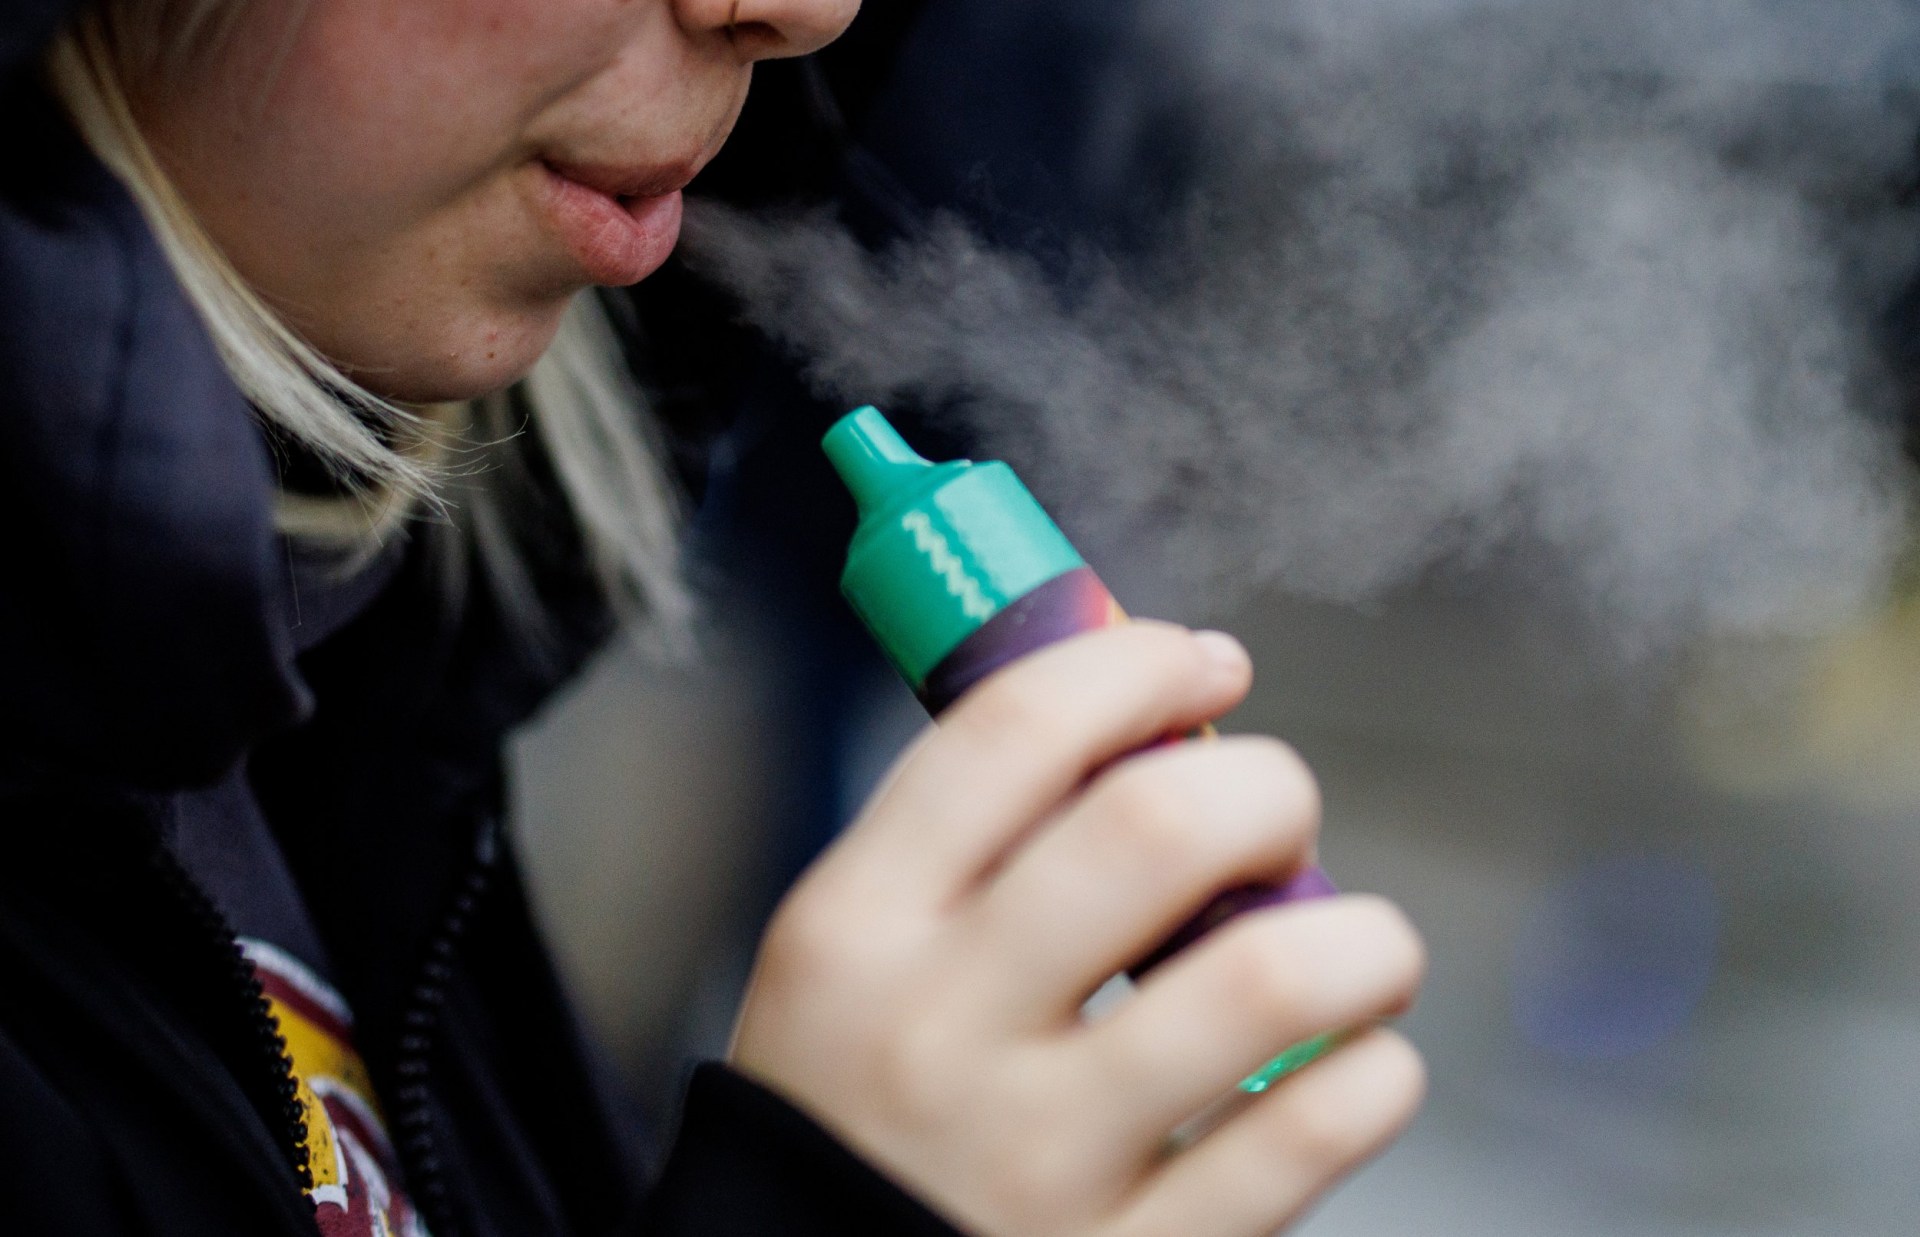 vaping could stunt brain growth in teenagers because of these toxic chemicals